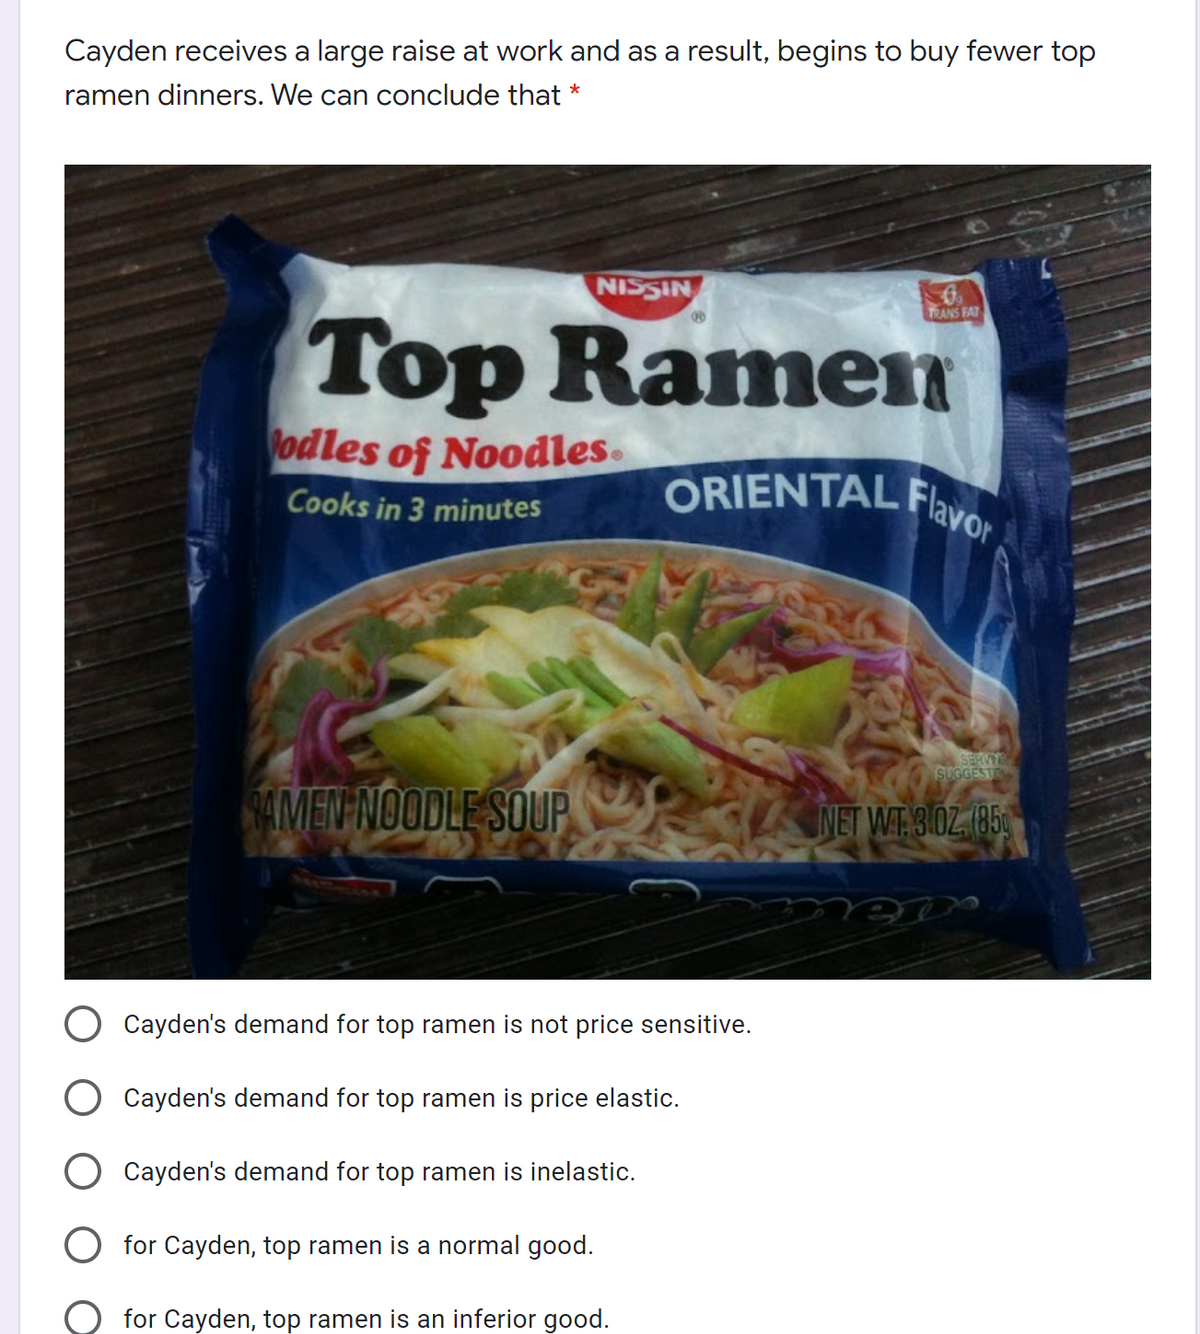 ORIENTAL Flavor,
Cayden receives a large raise at work and as a result, begins to buy fewer top
ramen dinners. We can conclude that *
NISSIN
Top Ramen
TRANS FAT
odles of Noodles.
Cooks in 3 minutes
SERVITS
SUGGESTO
MEP NOODLE SOUP
NET WT 3.0Z. (85
KLEL
Cayden's demand for top ramen is not price sensitive.
Cayden's demand for top ramen is price elastic.
Cayden's demand for top ramen is inelastic.
O for Cayden, top ramen is a normal good.
for Cayden, top ramen is an inferior good.
